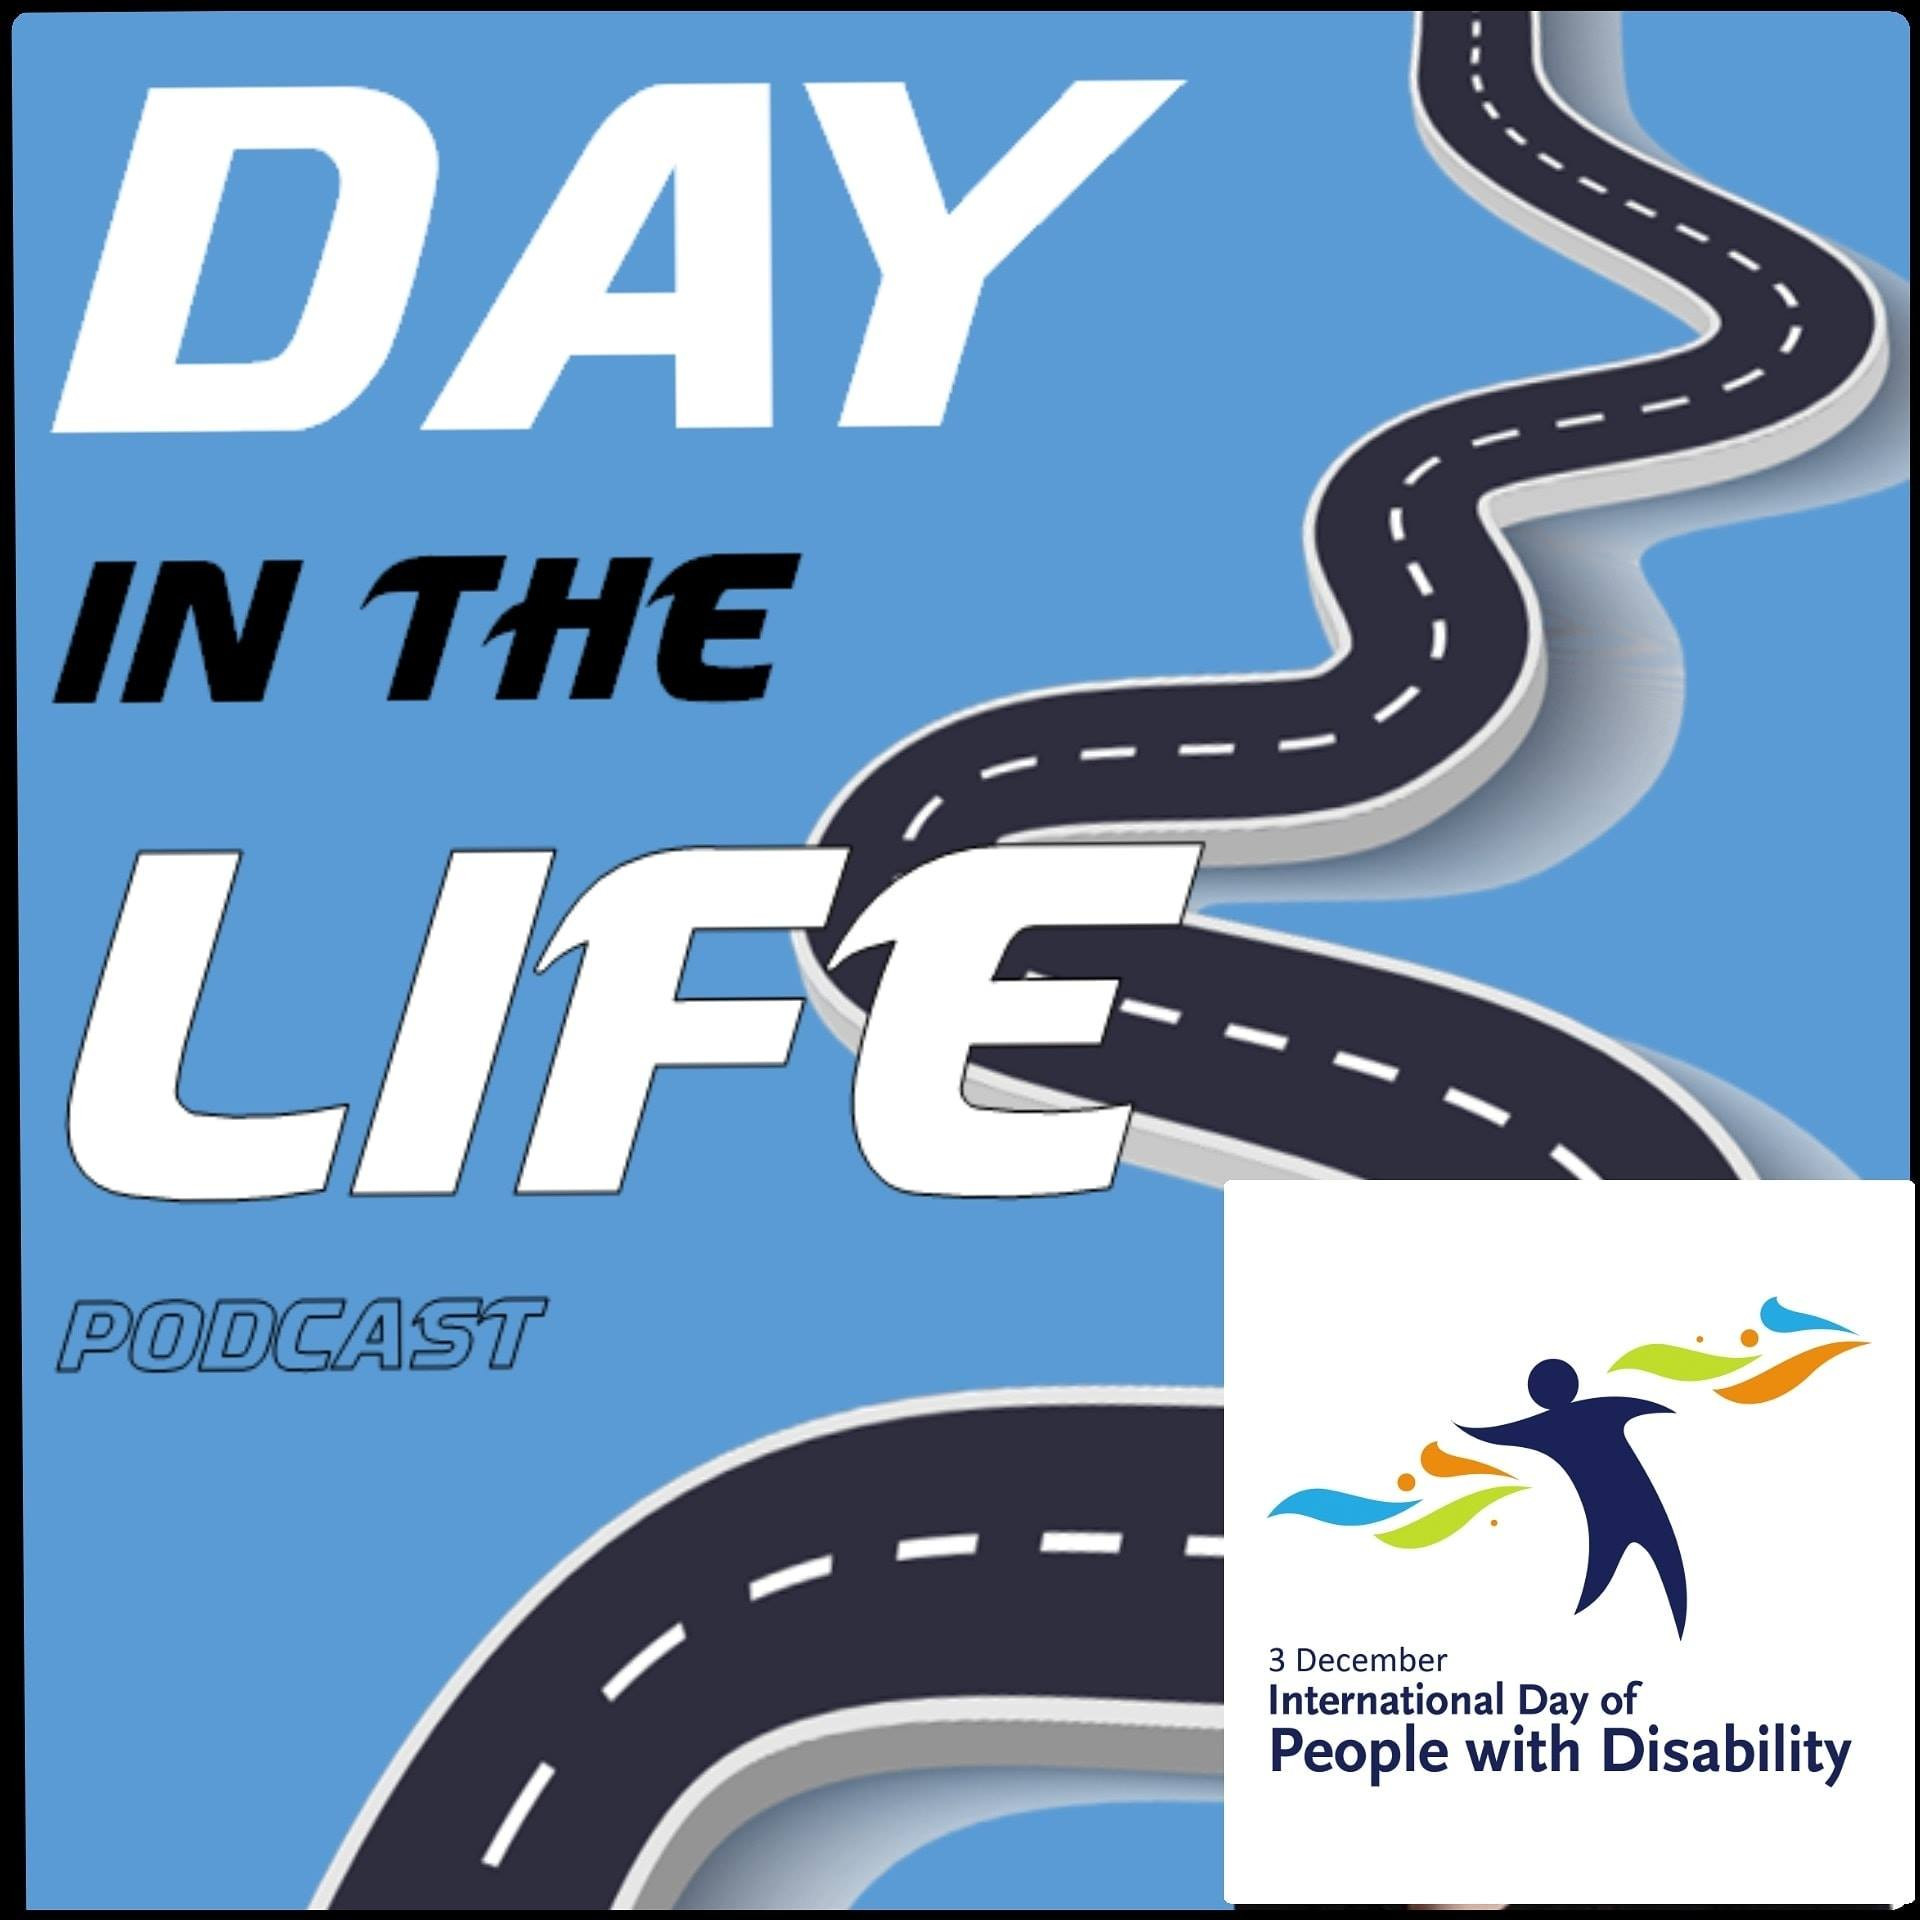 Day in the life podcast